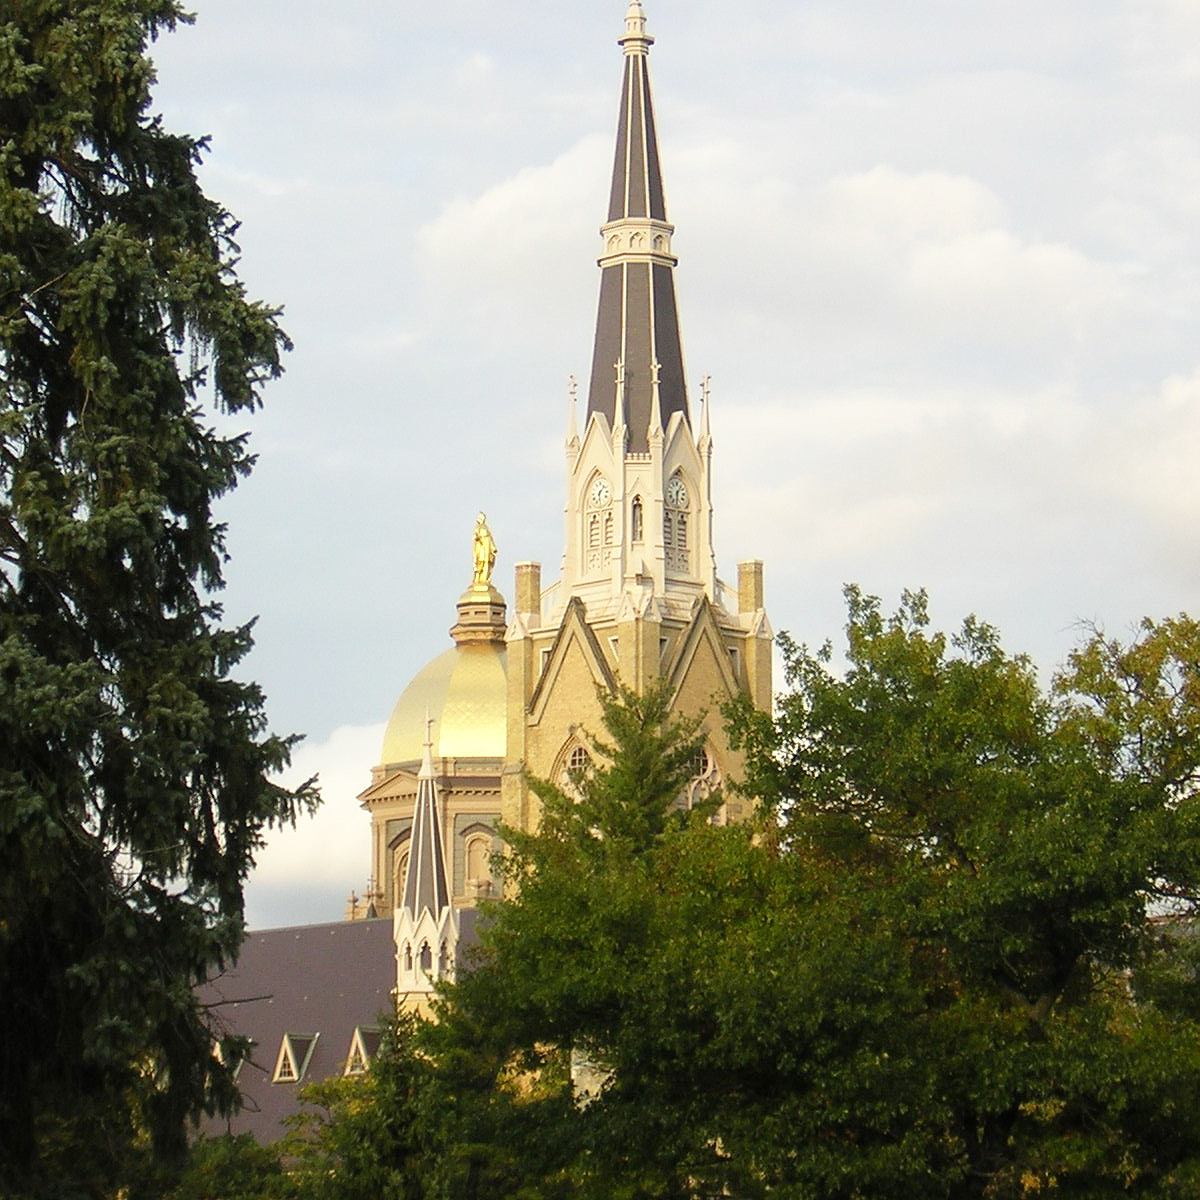 Golden Dome and Basilica of the Sacred Heart at University of Notre Dame